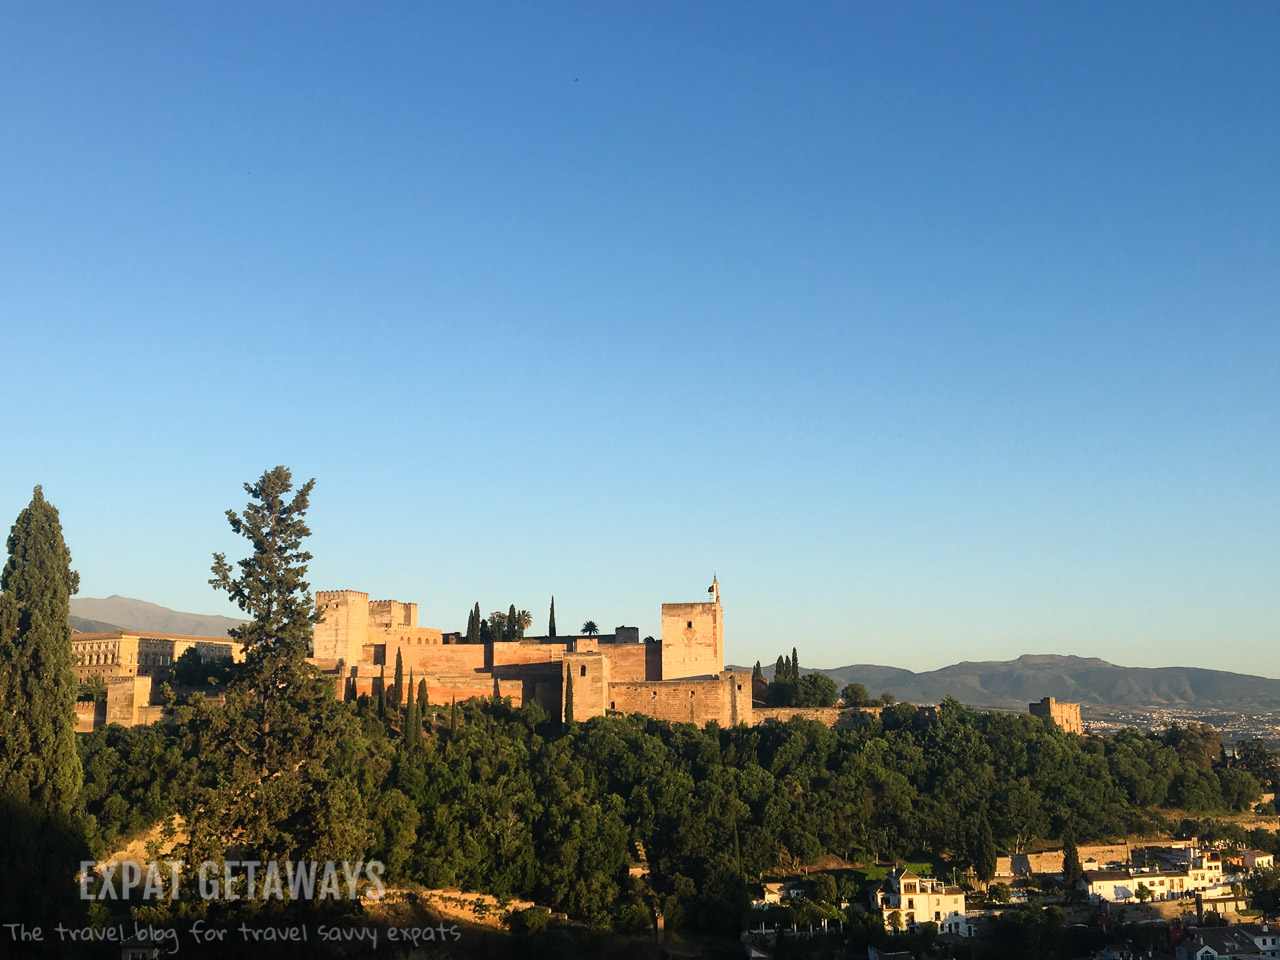 The Alhambra in Granada should be on every traveller's bucket list.